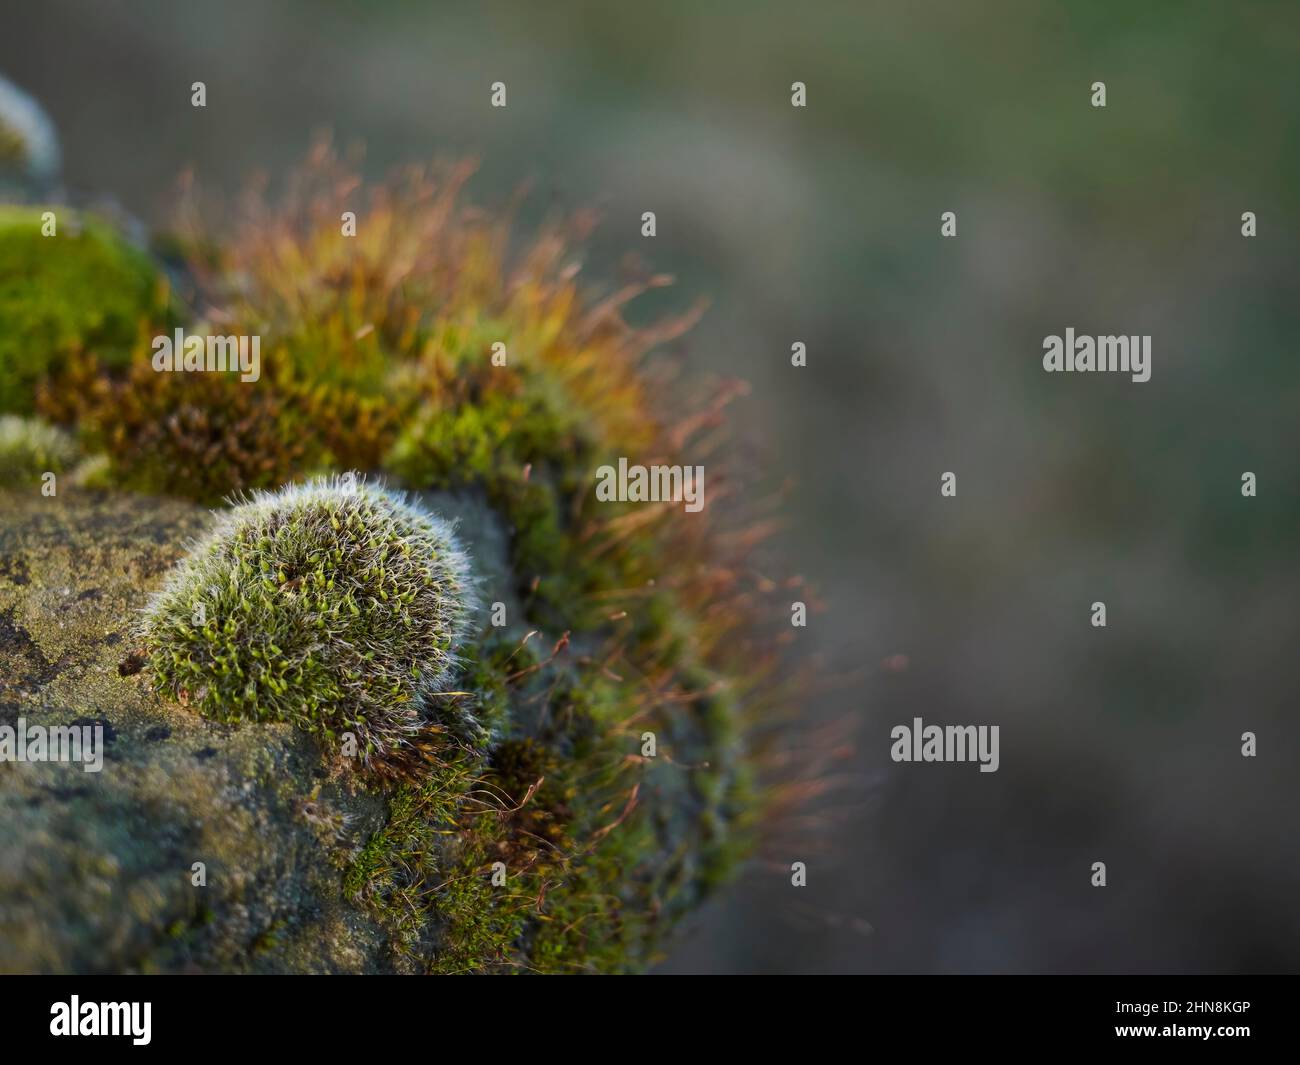 Clumps of moss on a dry stone wall in Yorkshire, UK, catch the rays of a setting winter sun. Stock Photo